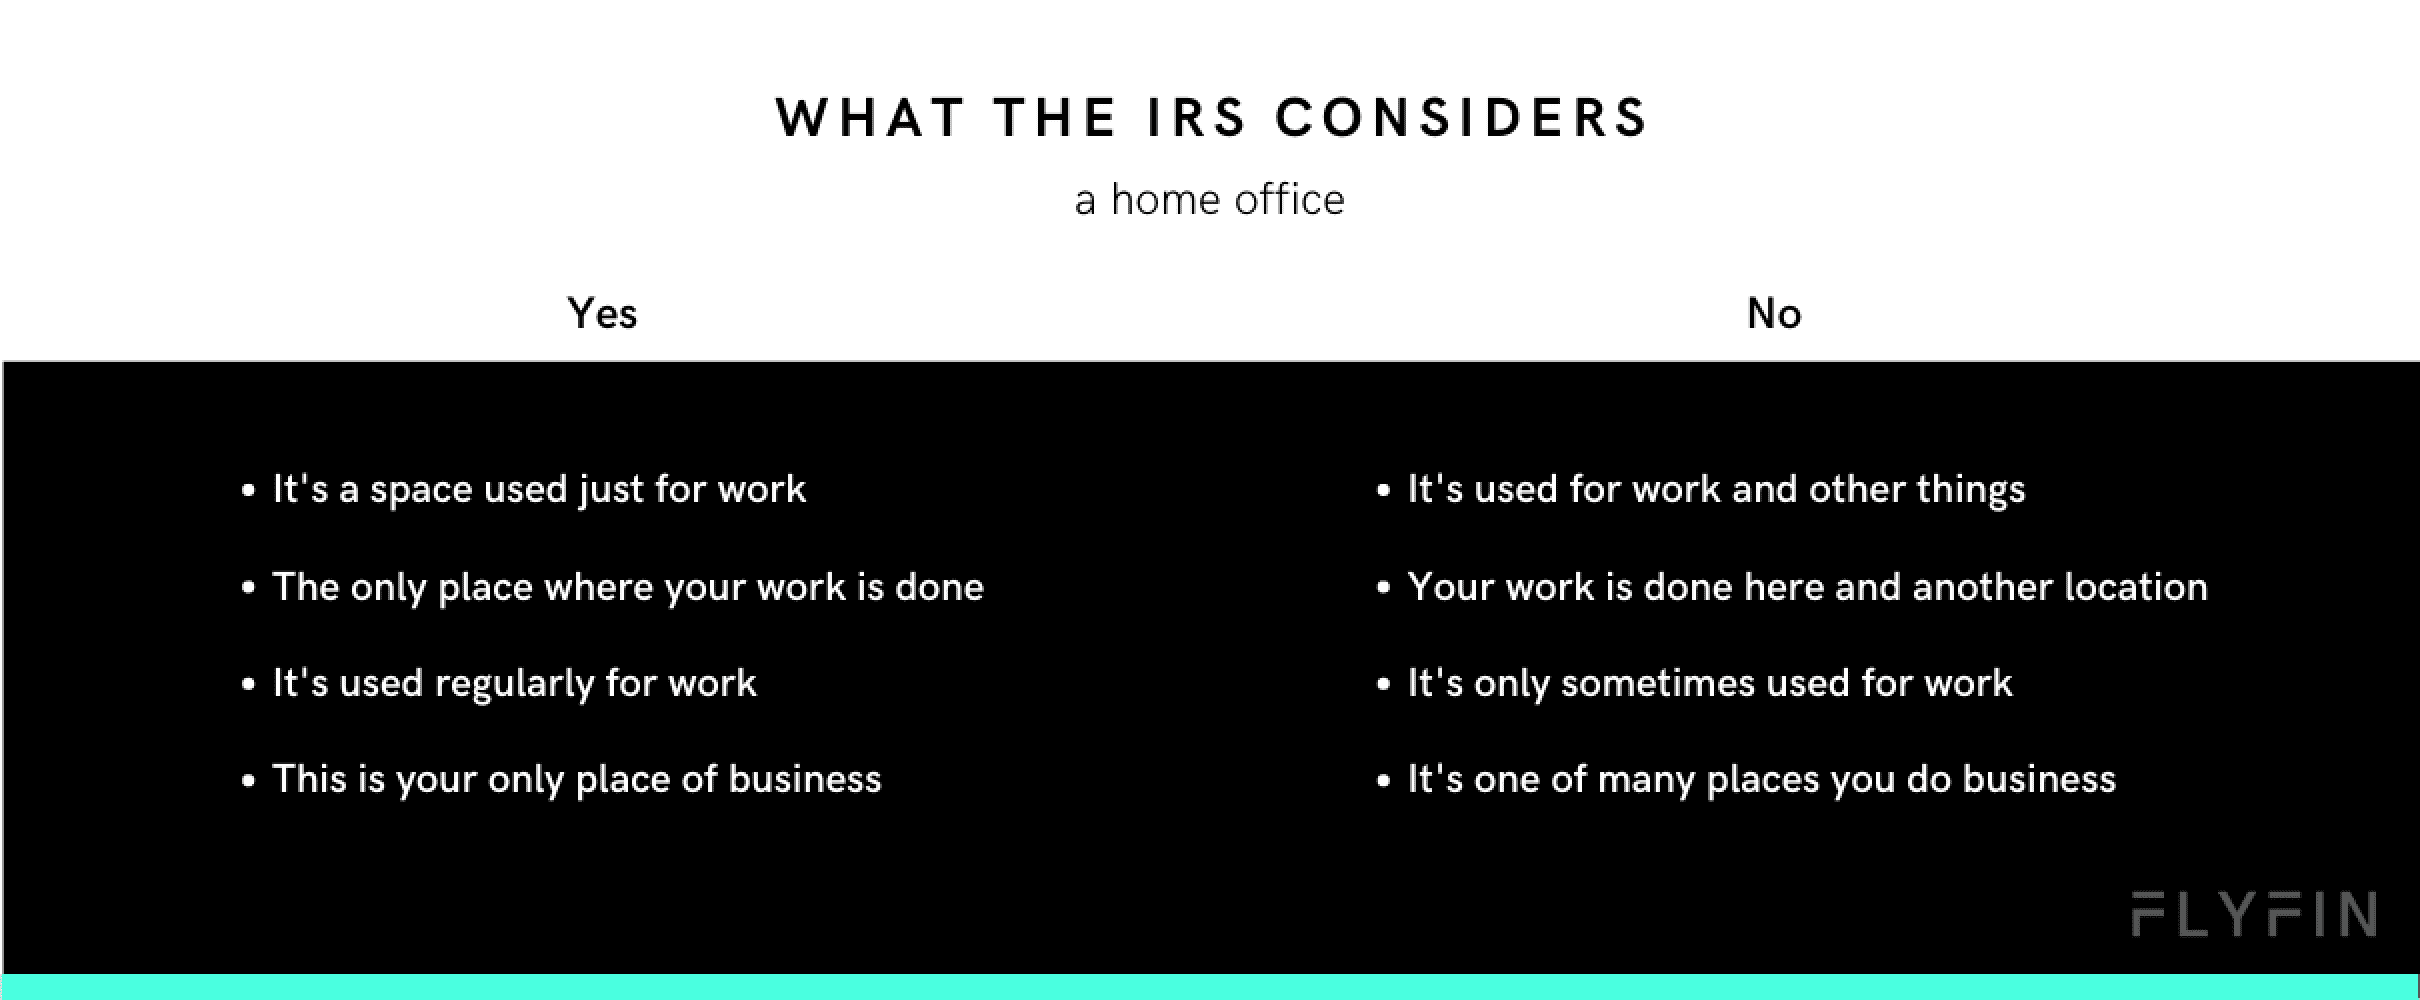 Image explaining what the IRS considers a home office for tax purposes. Criteria include exclusive use for work, regular use, and being the only place of business. Relevant for self-employed, freelancers, and those with 1099 income.